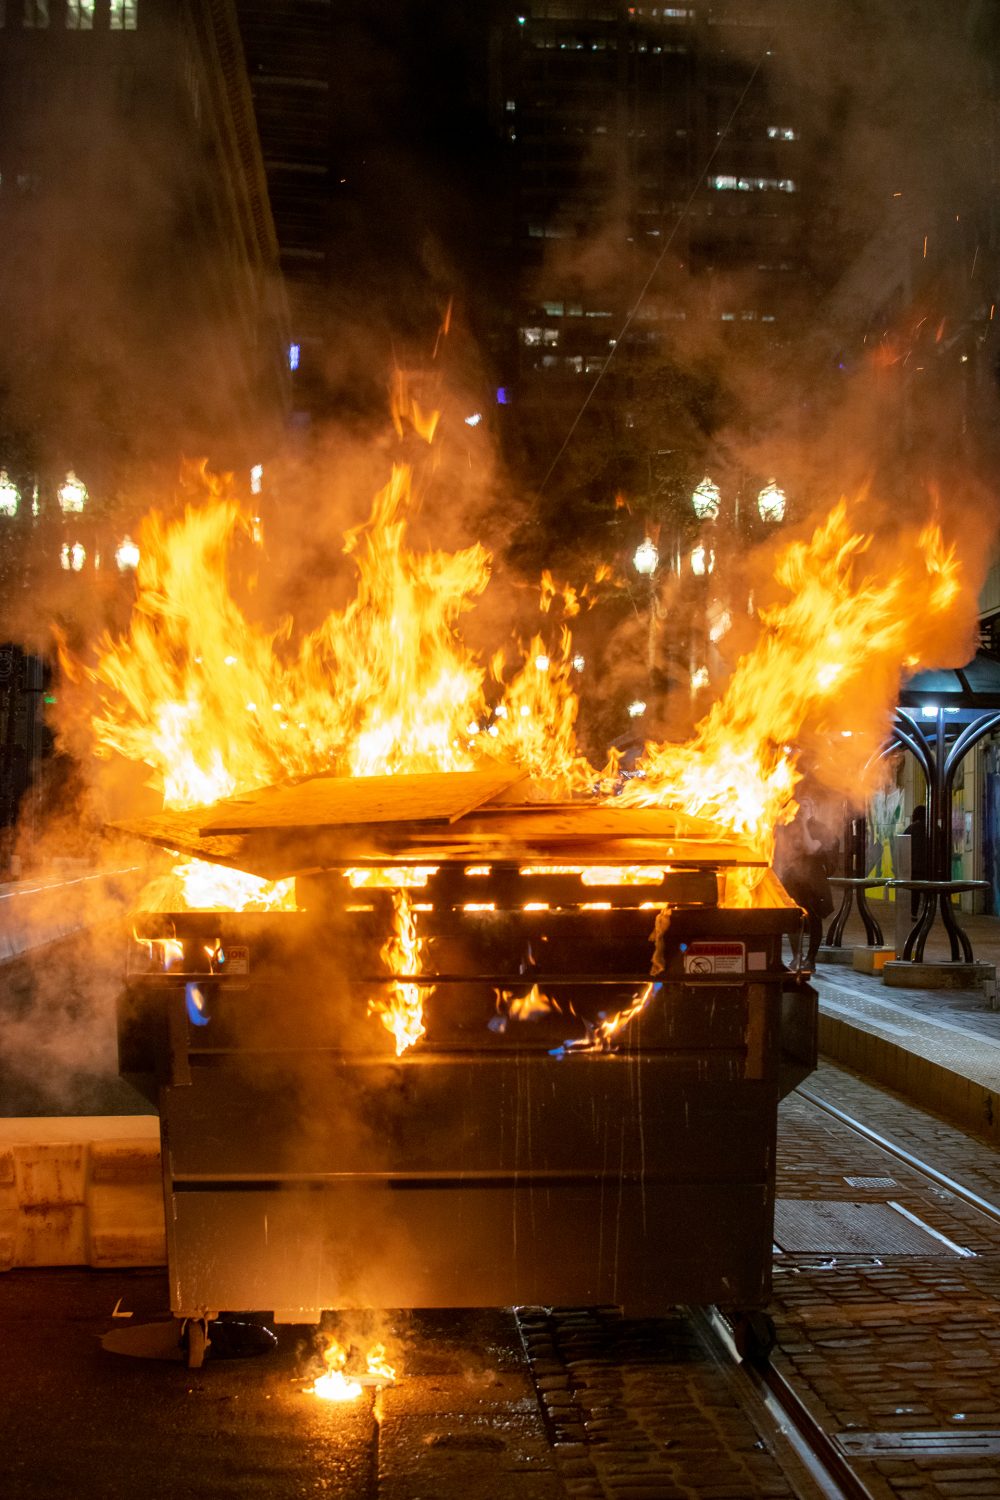 Image shows a garbage dumpster, which is on fire, blocking the middle of a street in downtown Portland.